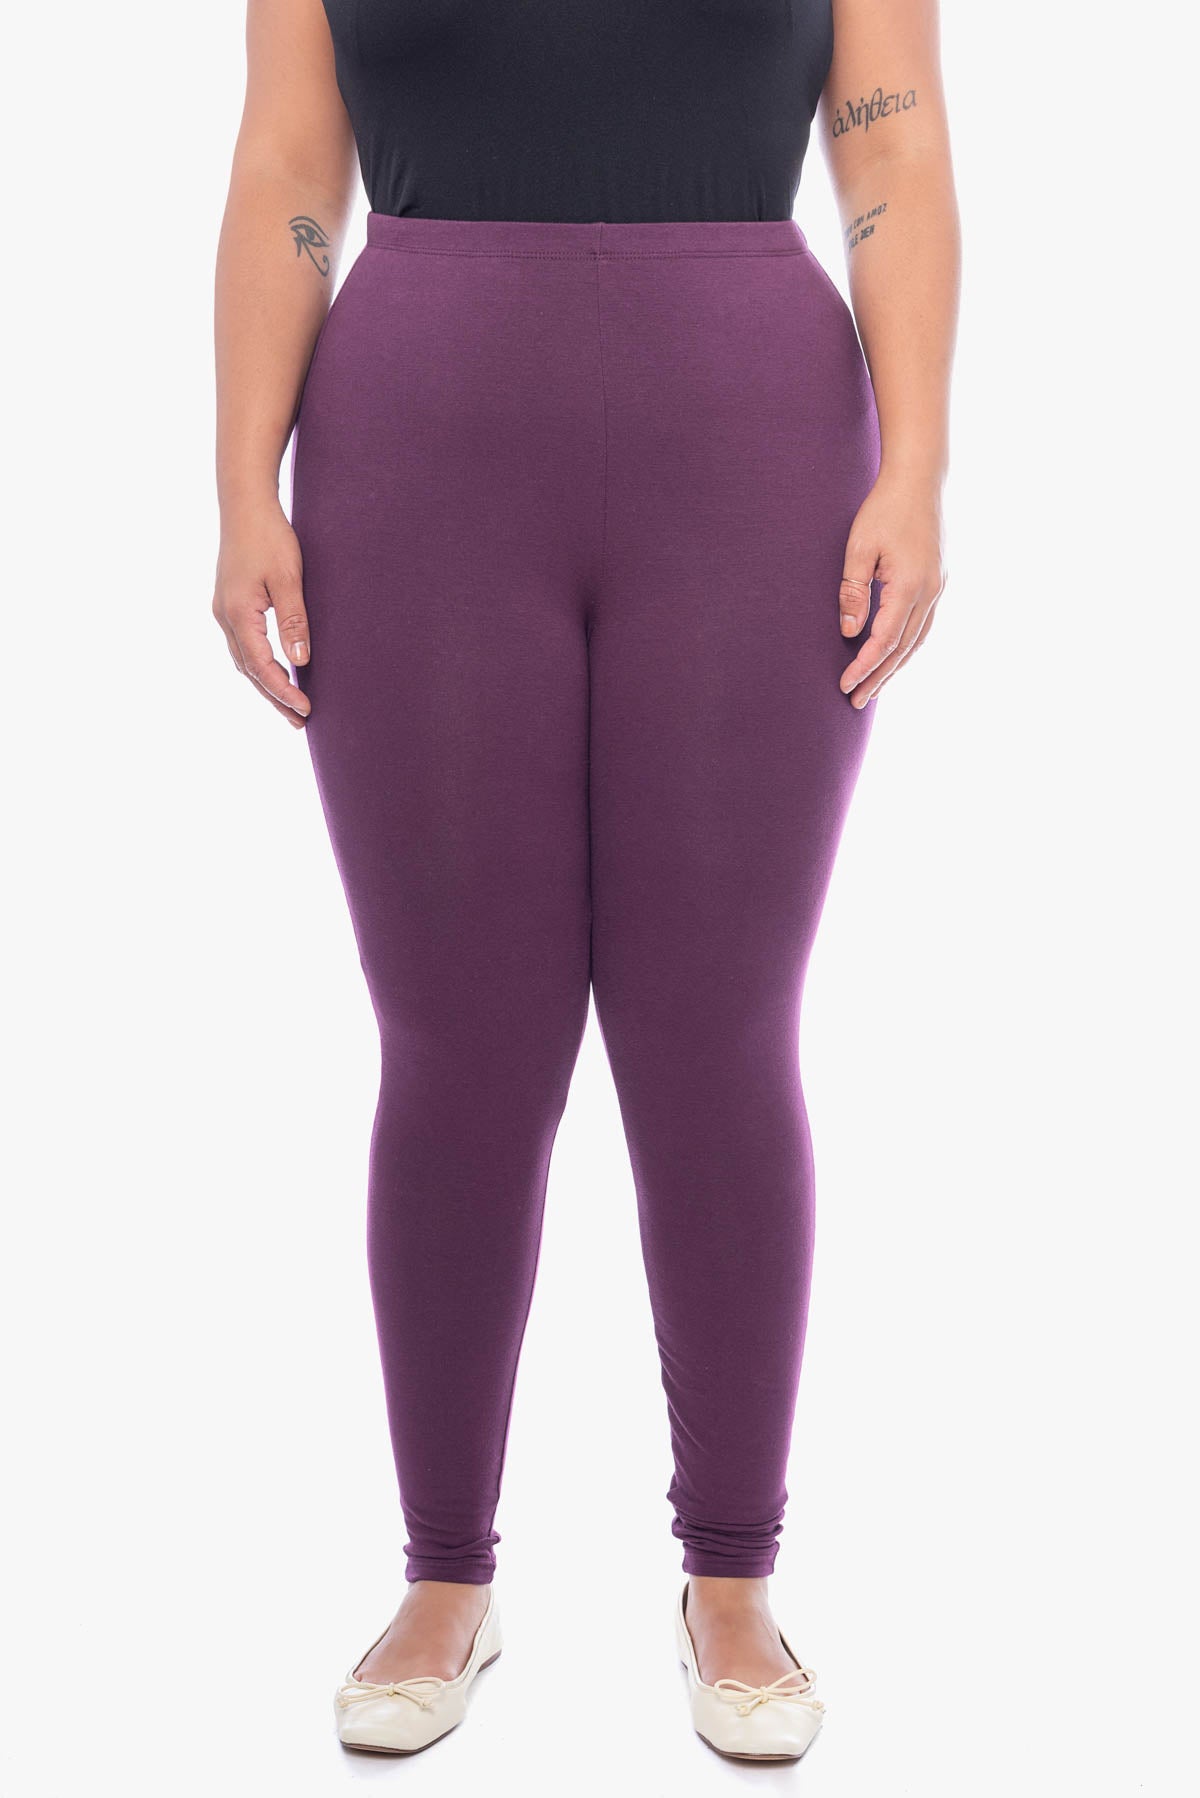 Find Cotton leggings by RIFA COLLECTION near me